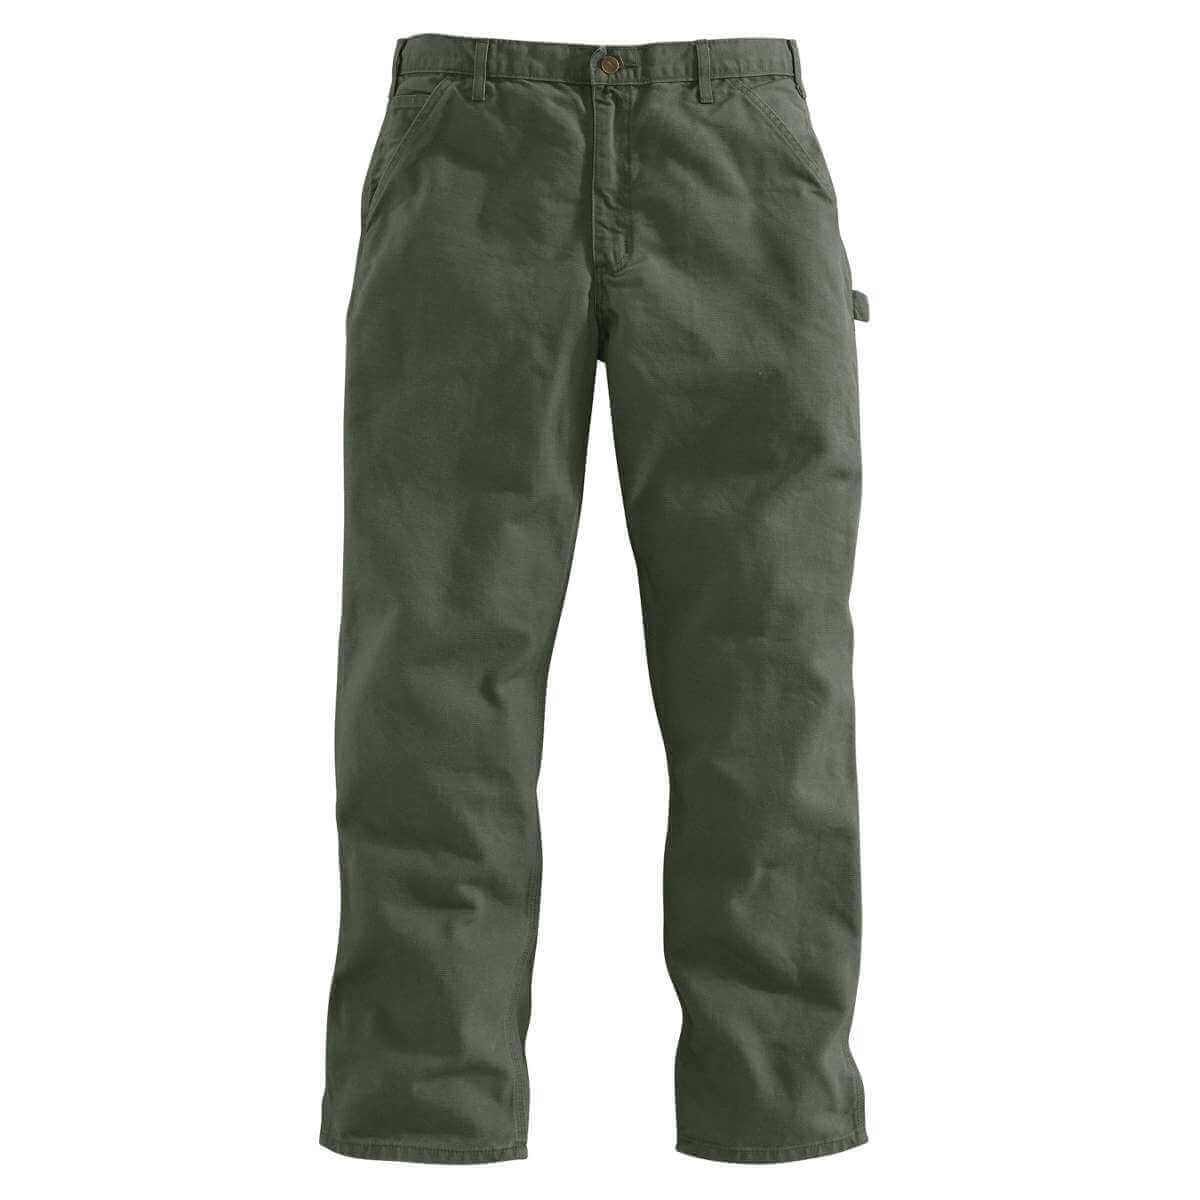 Carhartt Men's Loose Fit Washed Duck Utility Work Pant MOS Moss